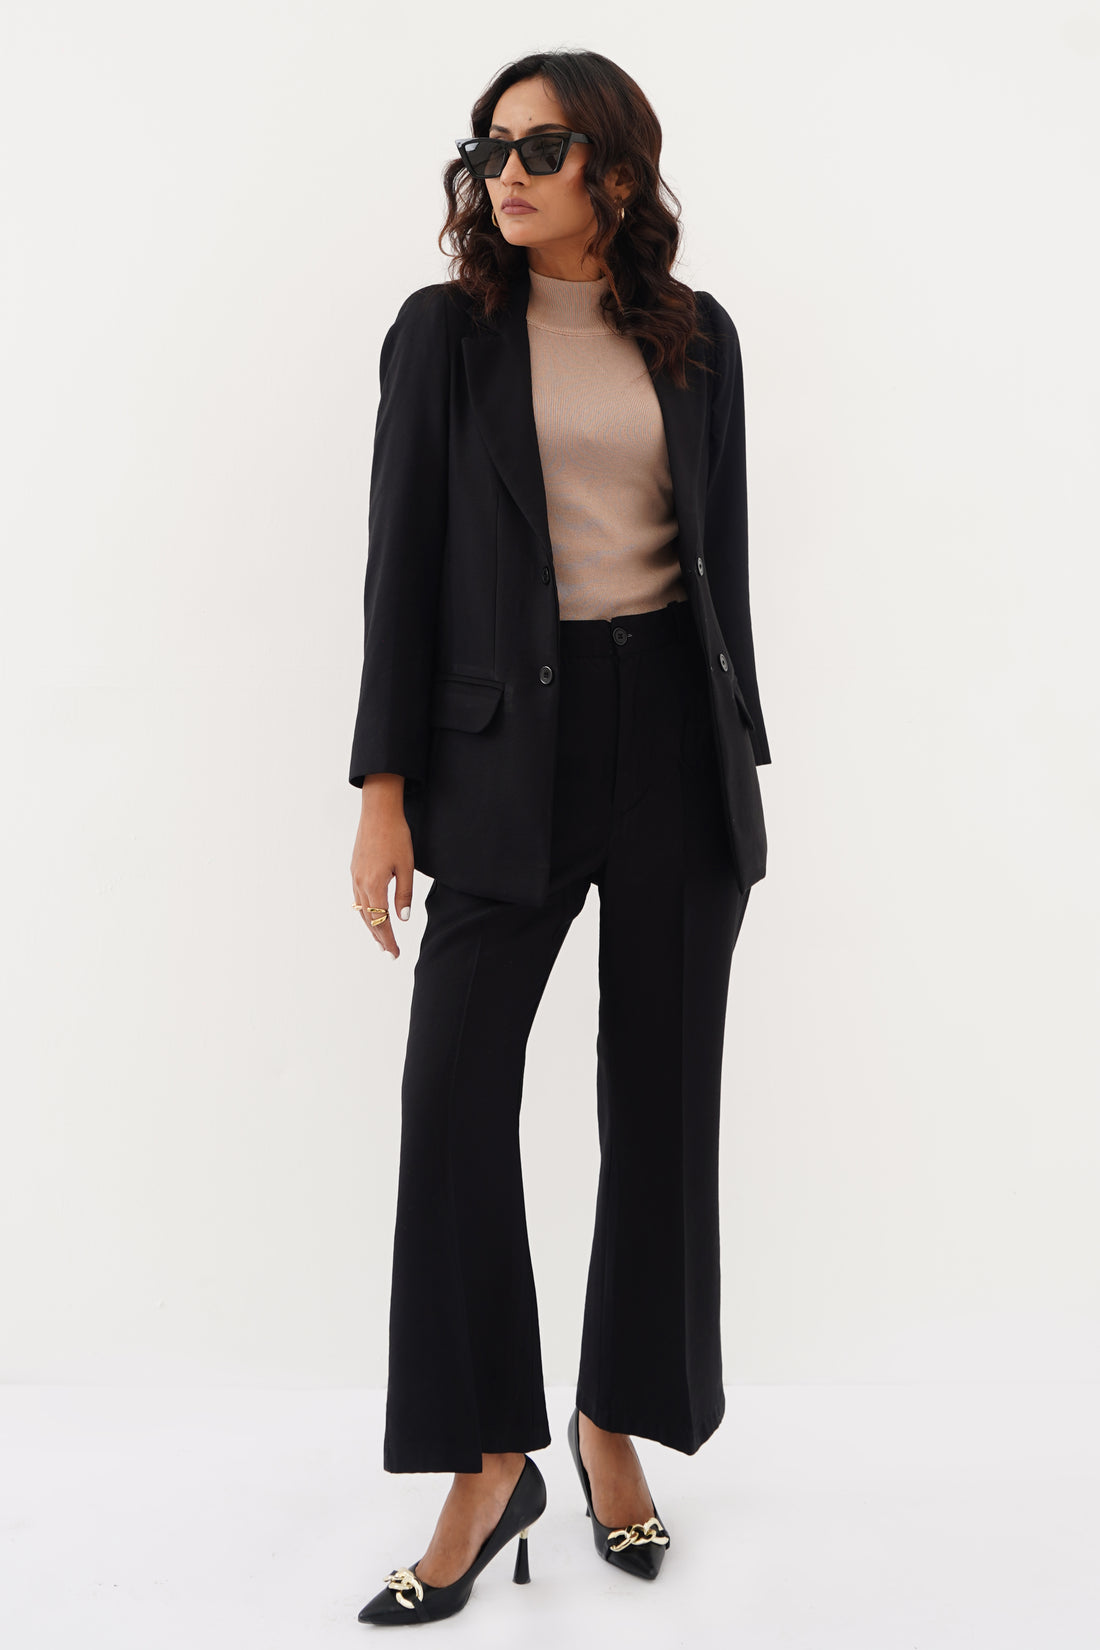 Genevieve 2 Piece Suit Black (10 days delivery time)